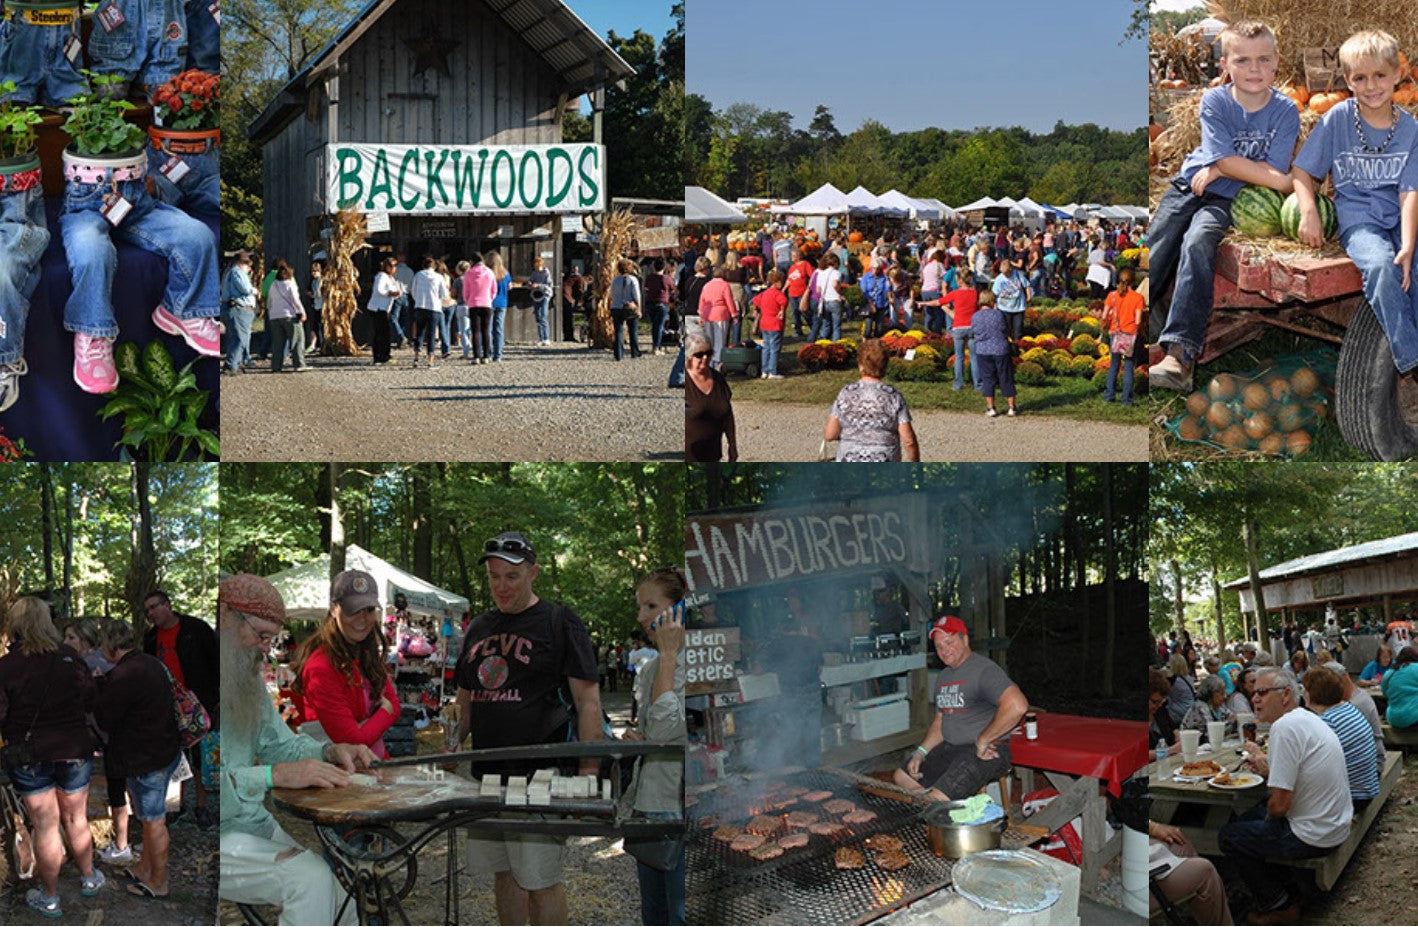 Eight pictures of Backwoods Fest including shopping, food, games, eating